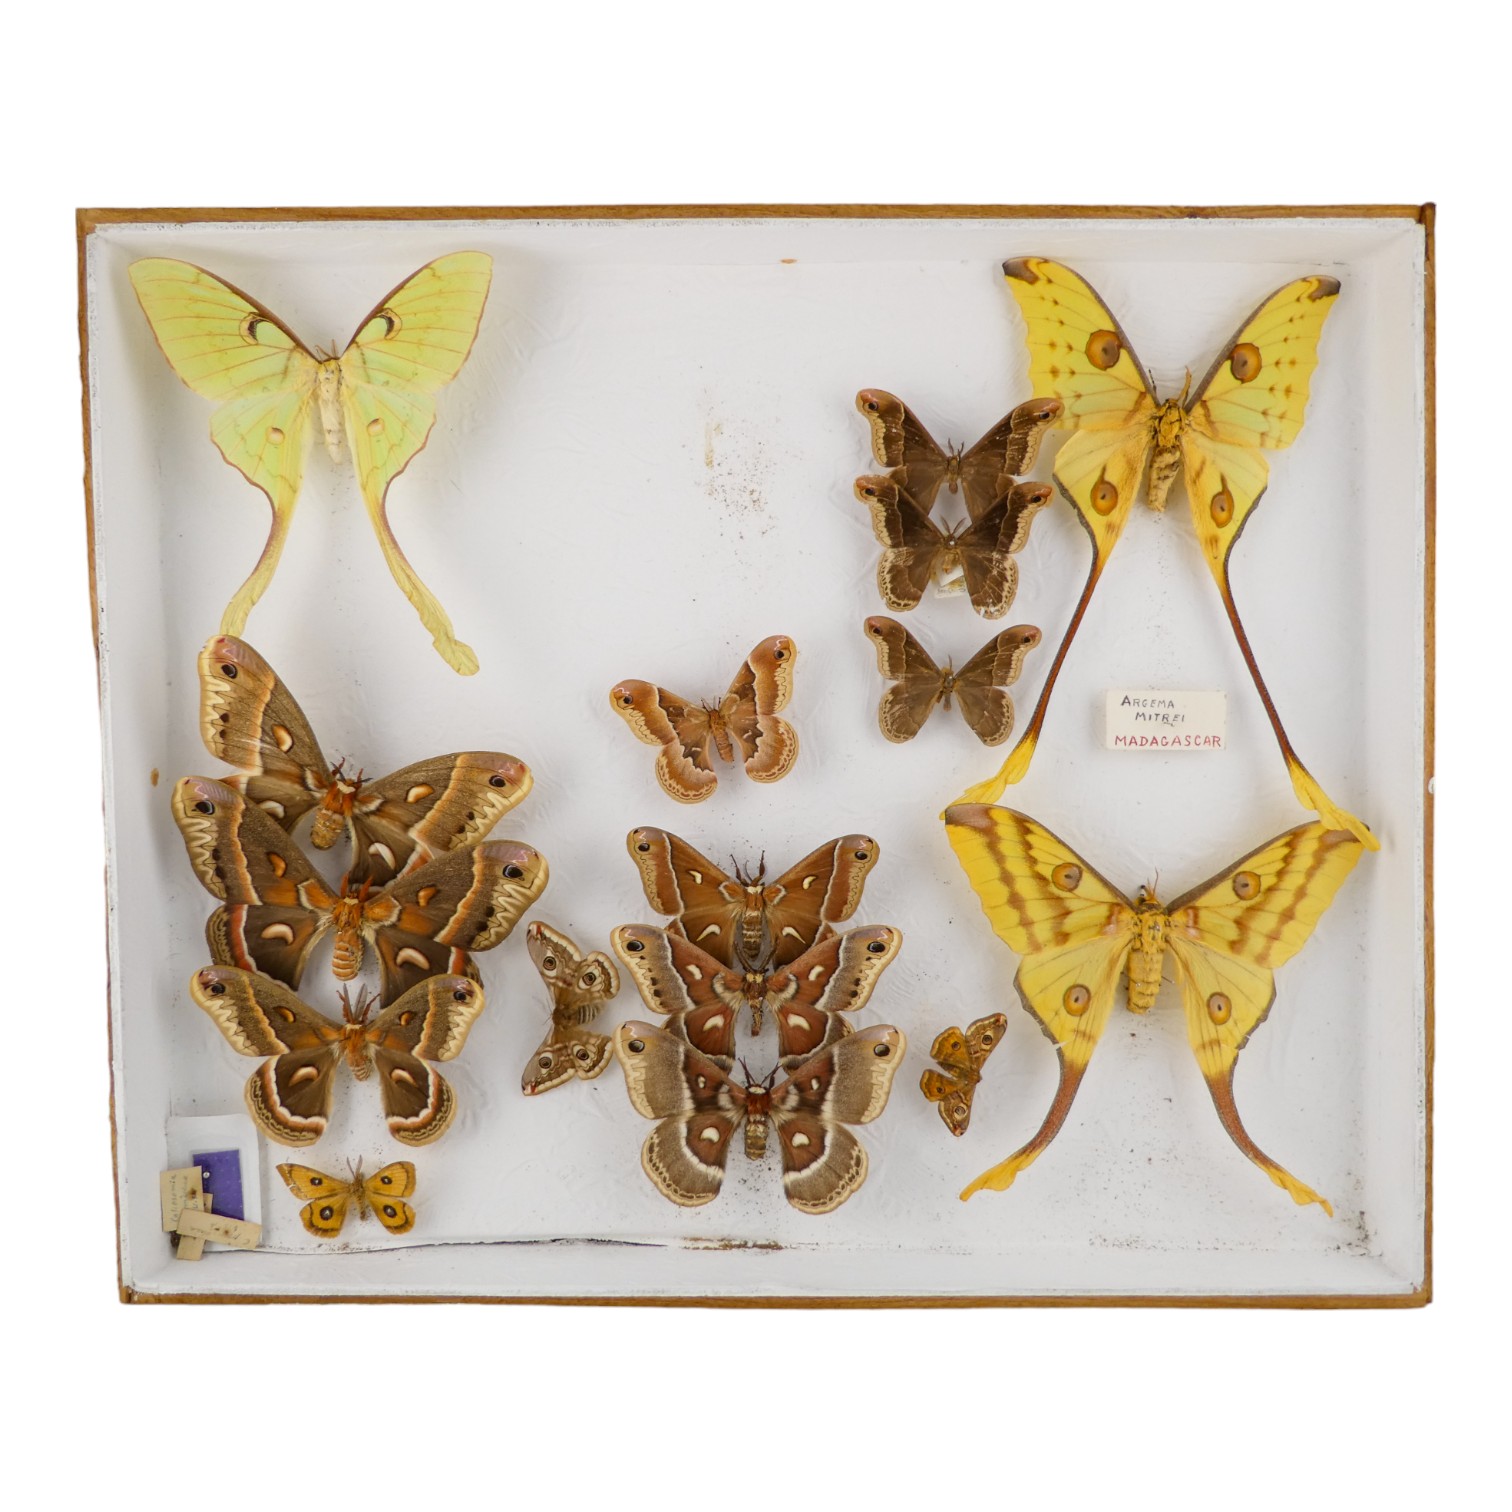 A case of moths randomly set - including African Moon Moth and Glover's Silkmoth